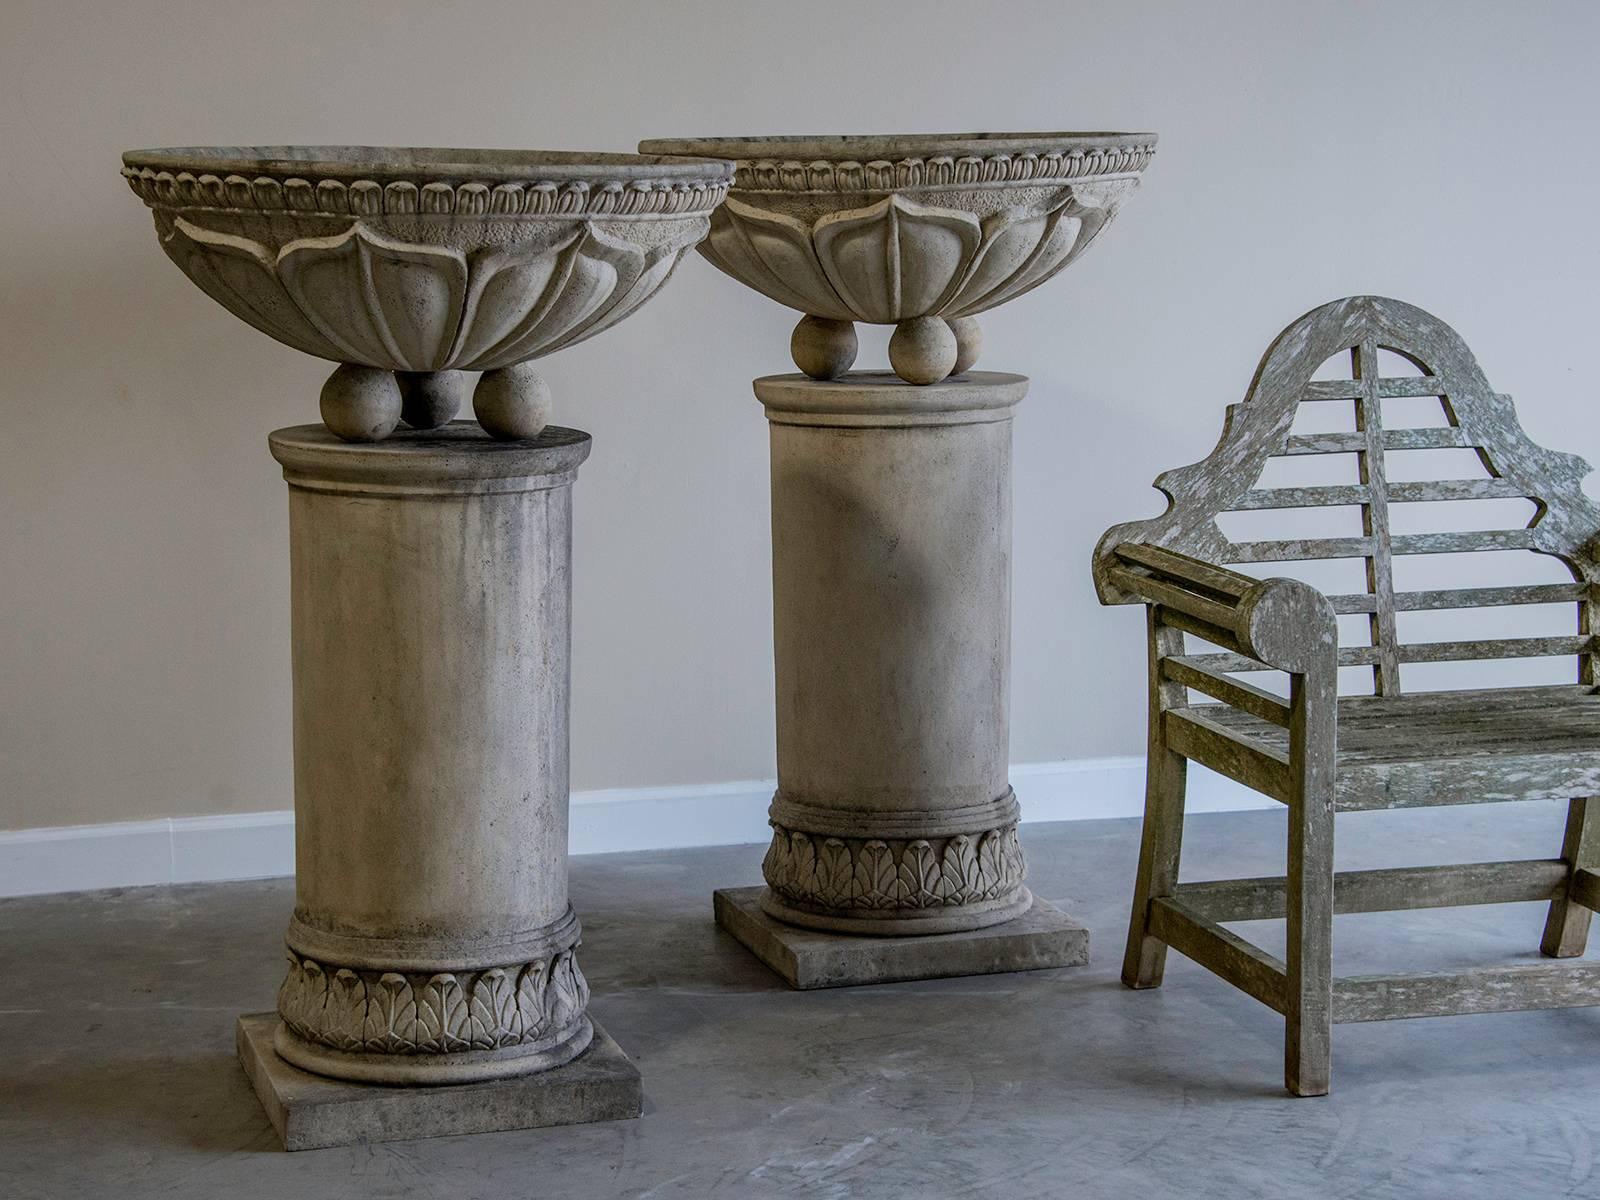 Neoclassical Pair of Vintage French Circular Basins Atop Columns, Relief Decoration